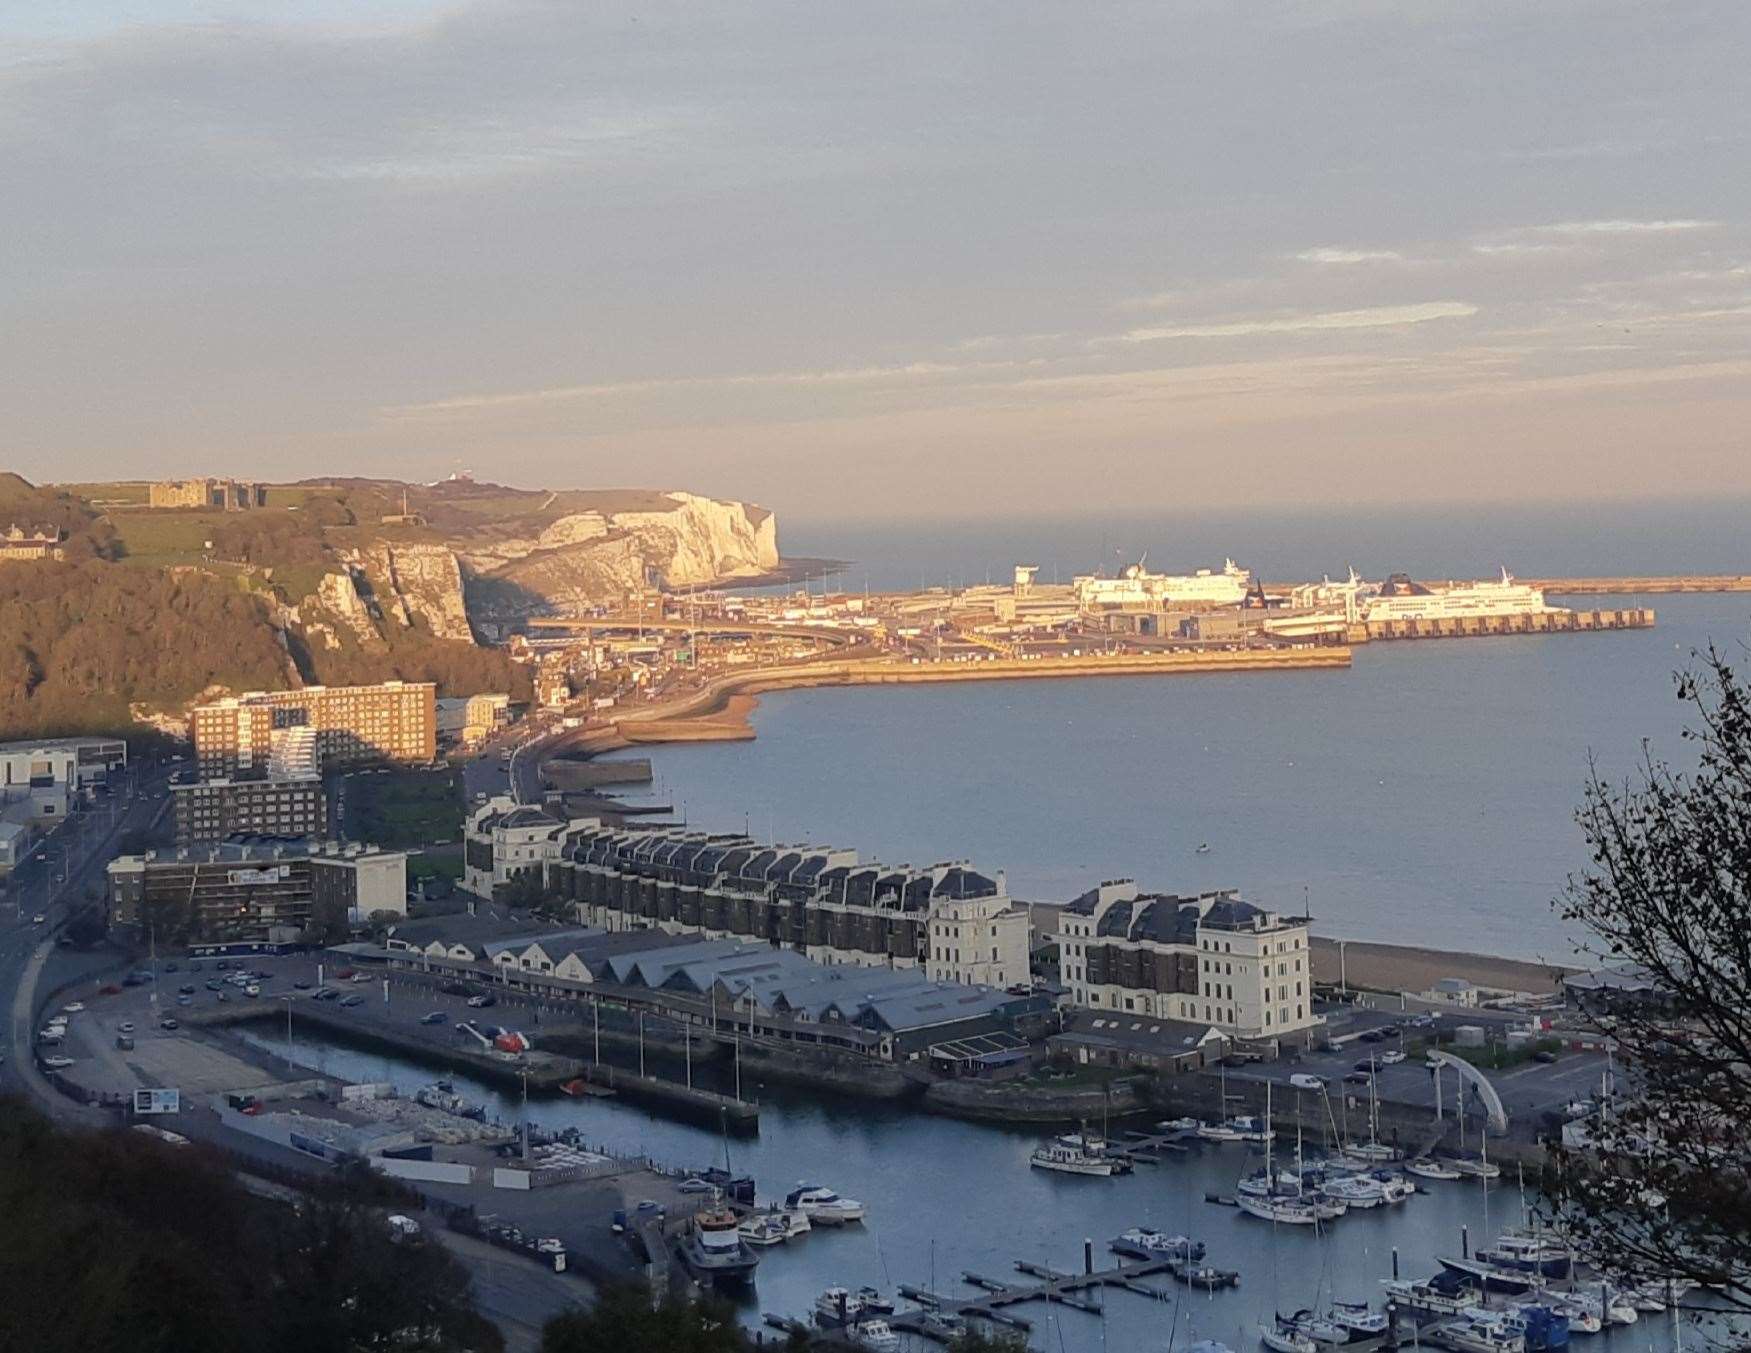 The migrants were brought to Dover for interview and assessment